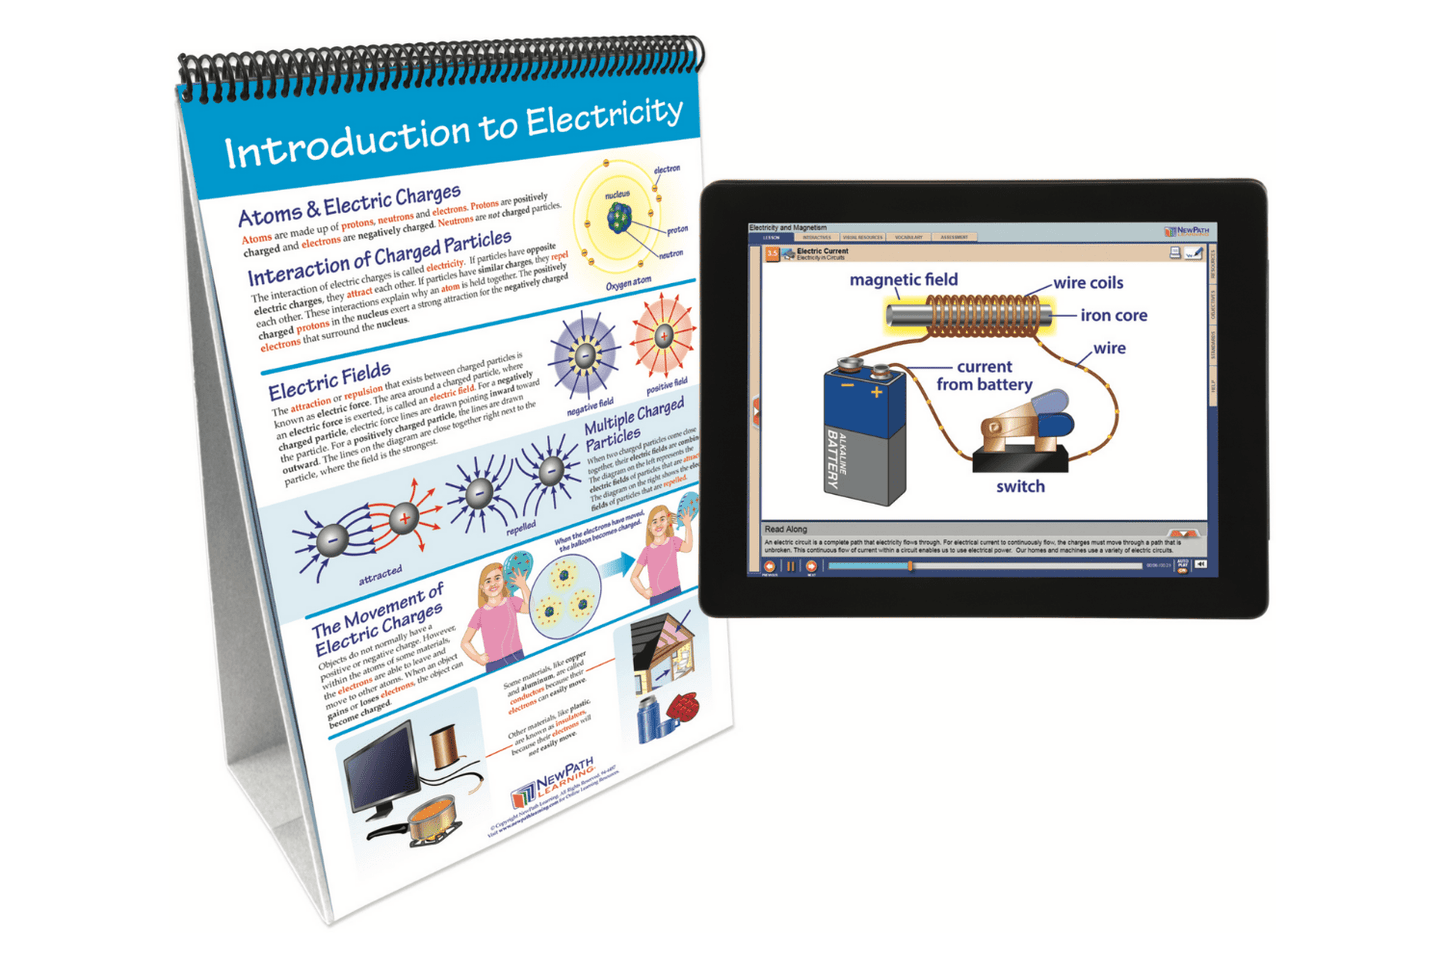 Arbor Scientific Electricity & Magnetism Flip Chart Set With Online Multimedia Lesson